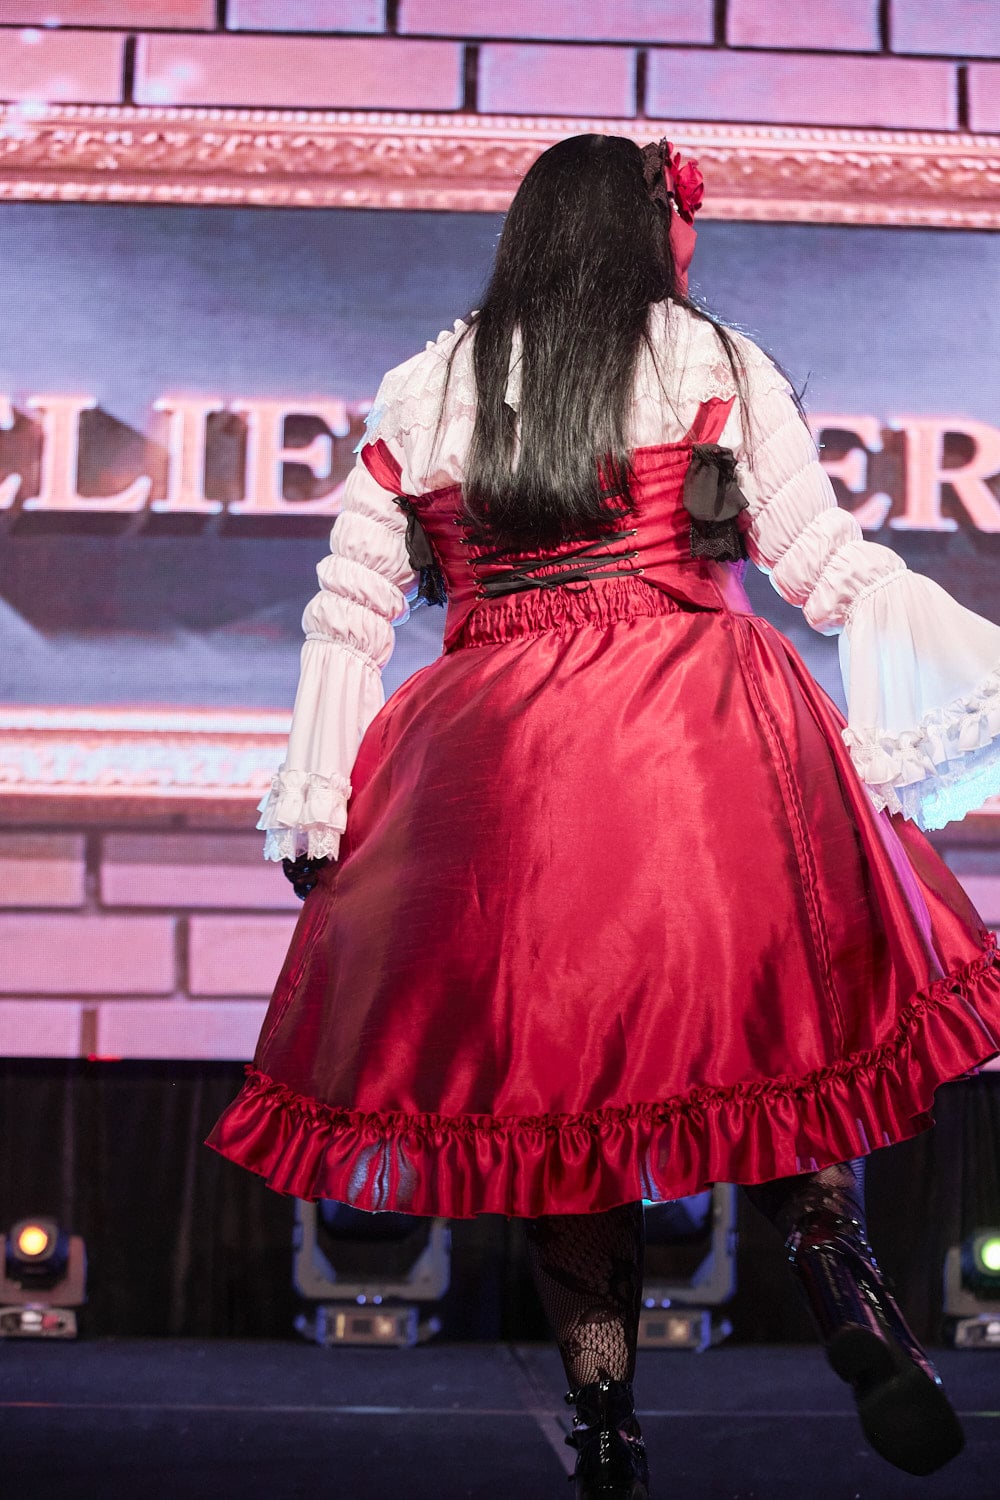 Plus size gothic lolita wearing red and black shantung bustle dress with white princess sleeve blouse, lace tights, and black shoes - backside.